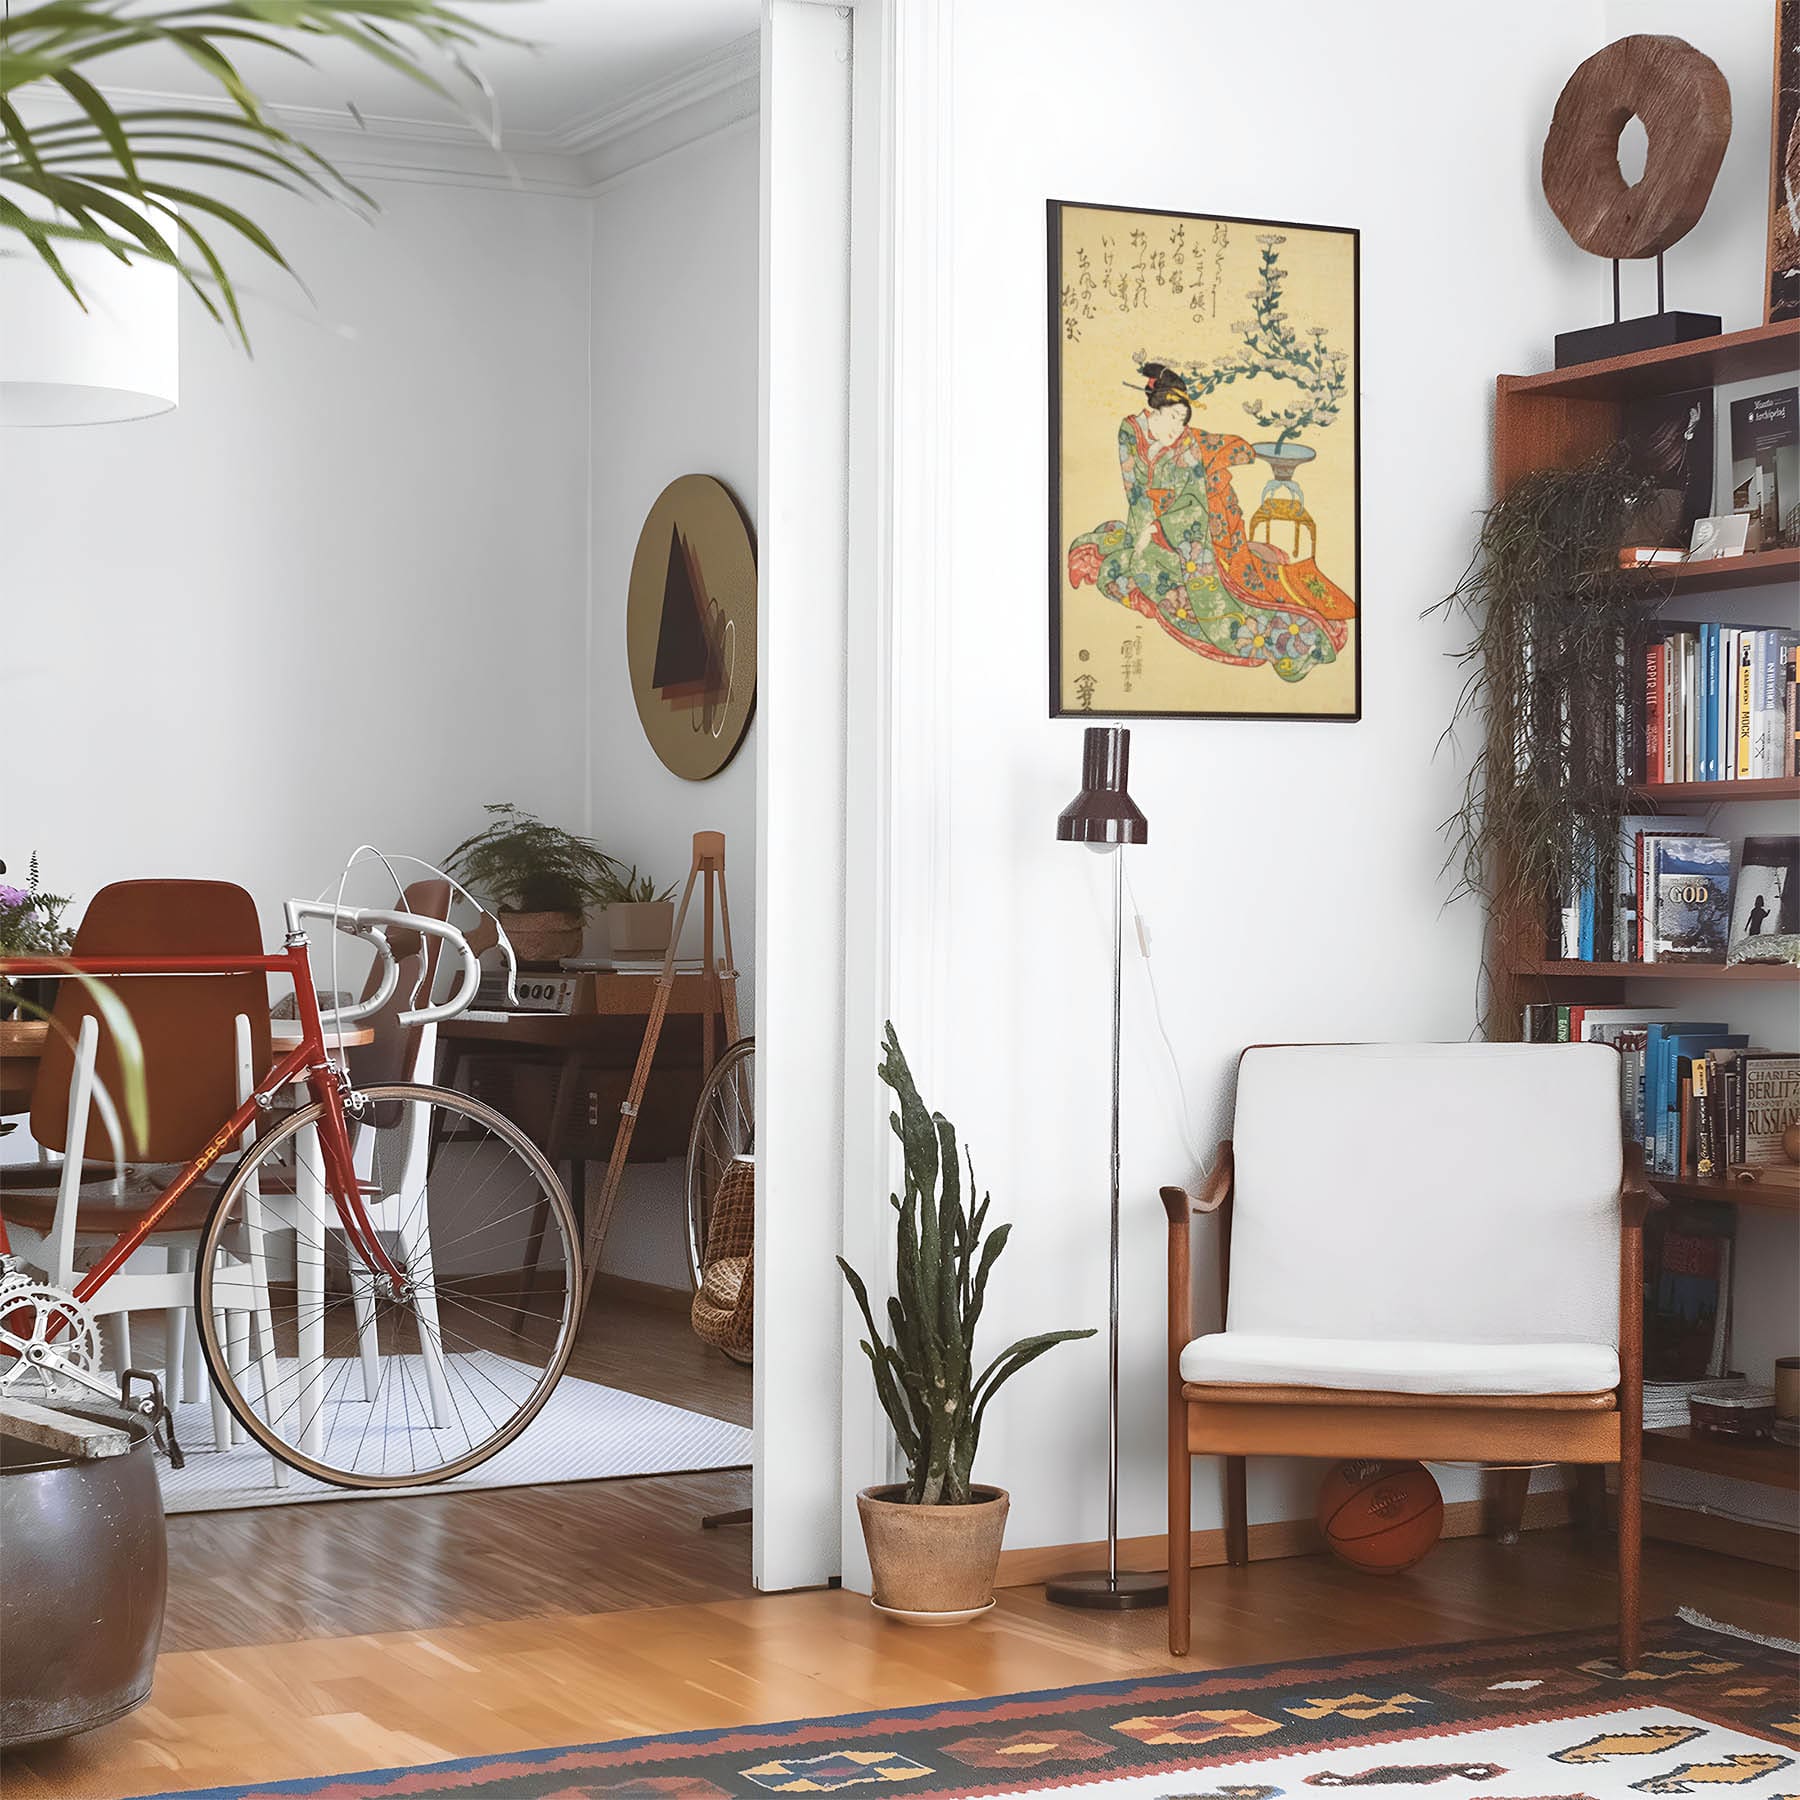 Eclectic living room with a road bike, bookshelf and house plants that features framed artwork of a Light Green and Yellow Woodblock above a chair and lamp